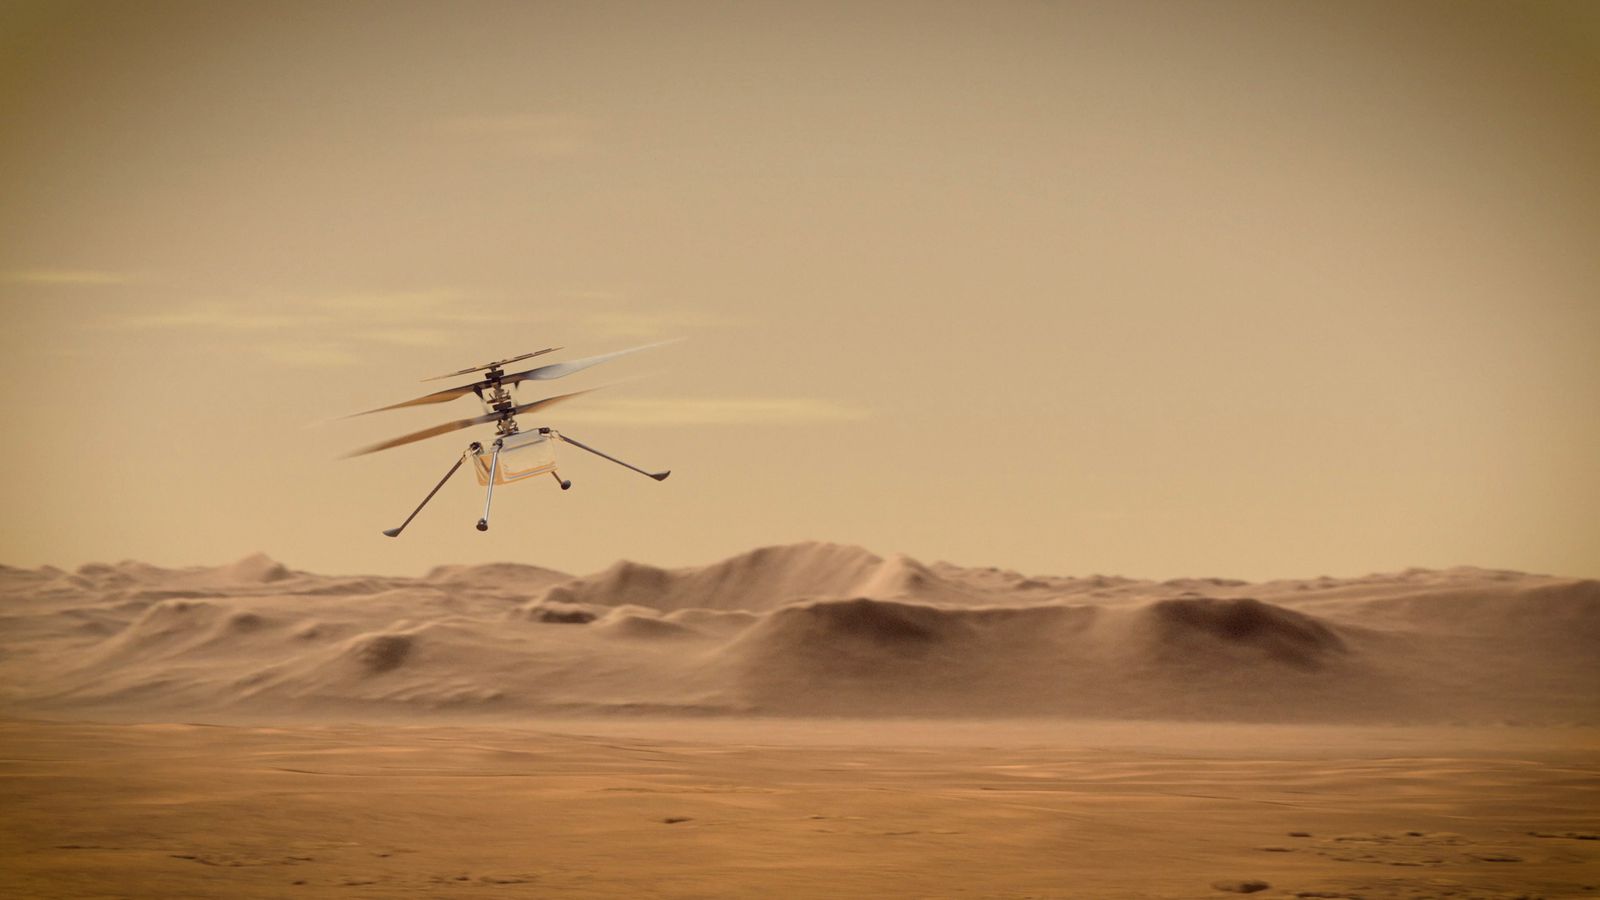 mars helicopter's historic mission finally over after rotor damaged